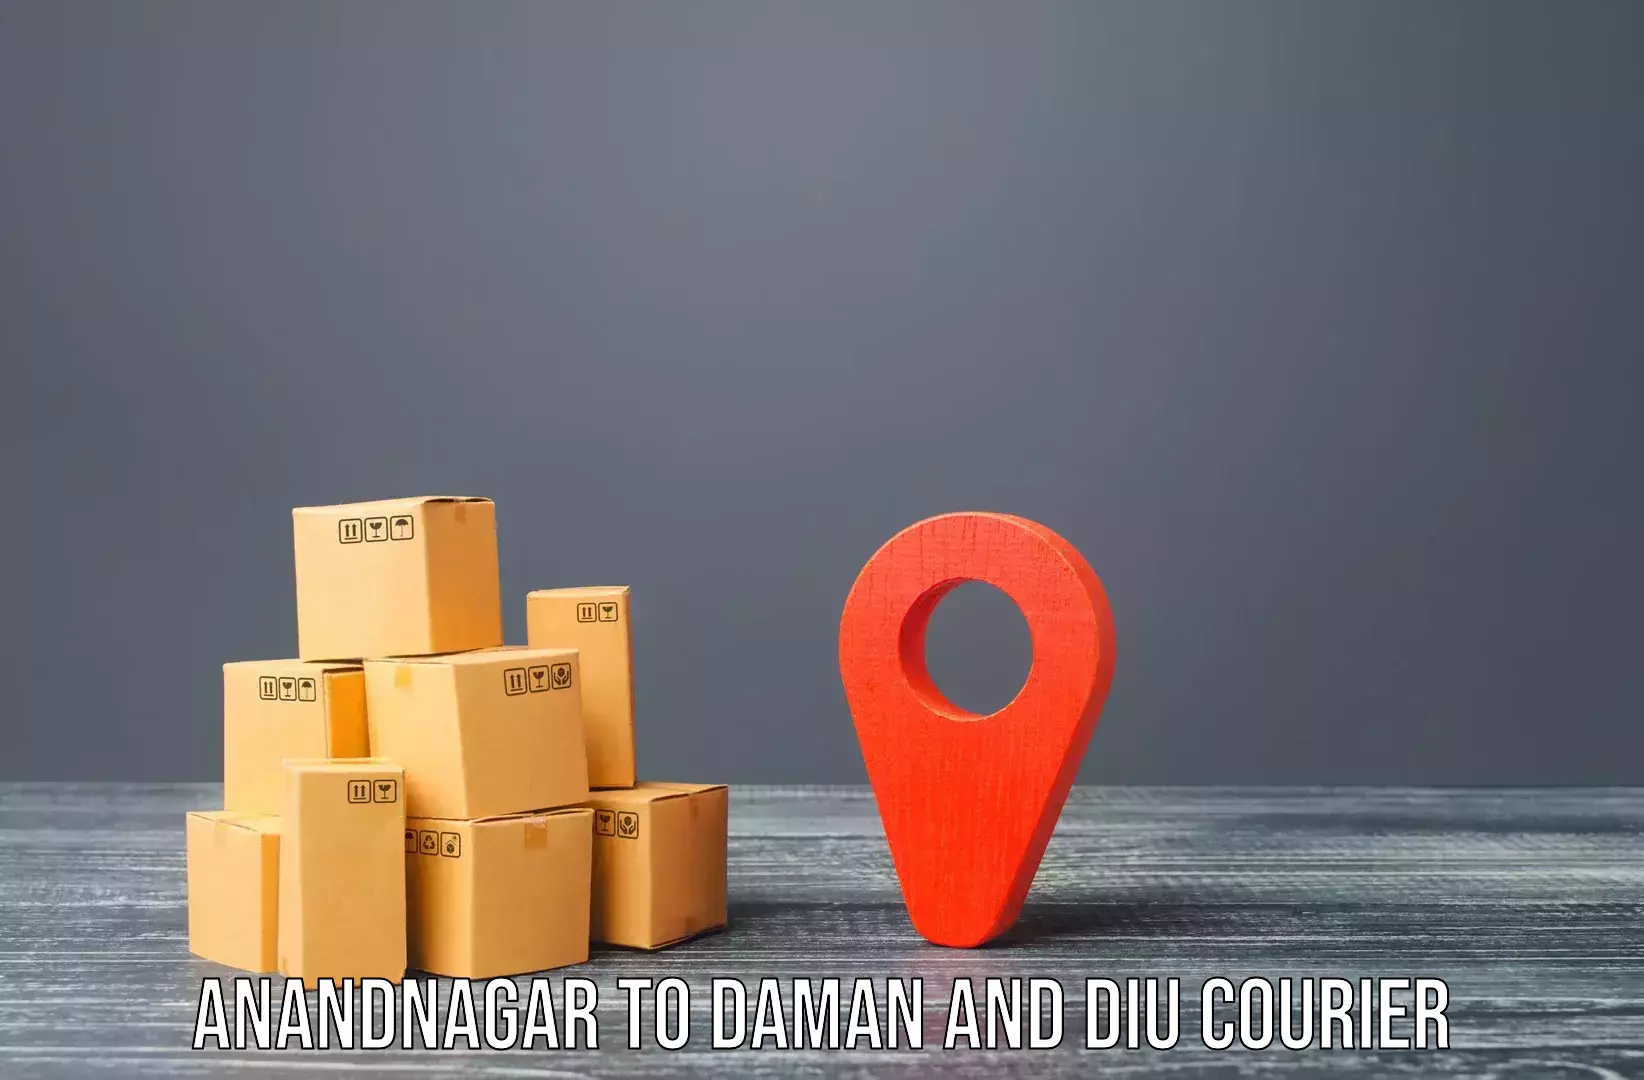 Budget-friendly moving services Anandnagar to Diu